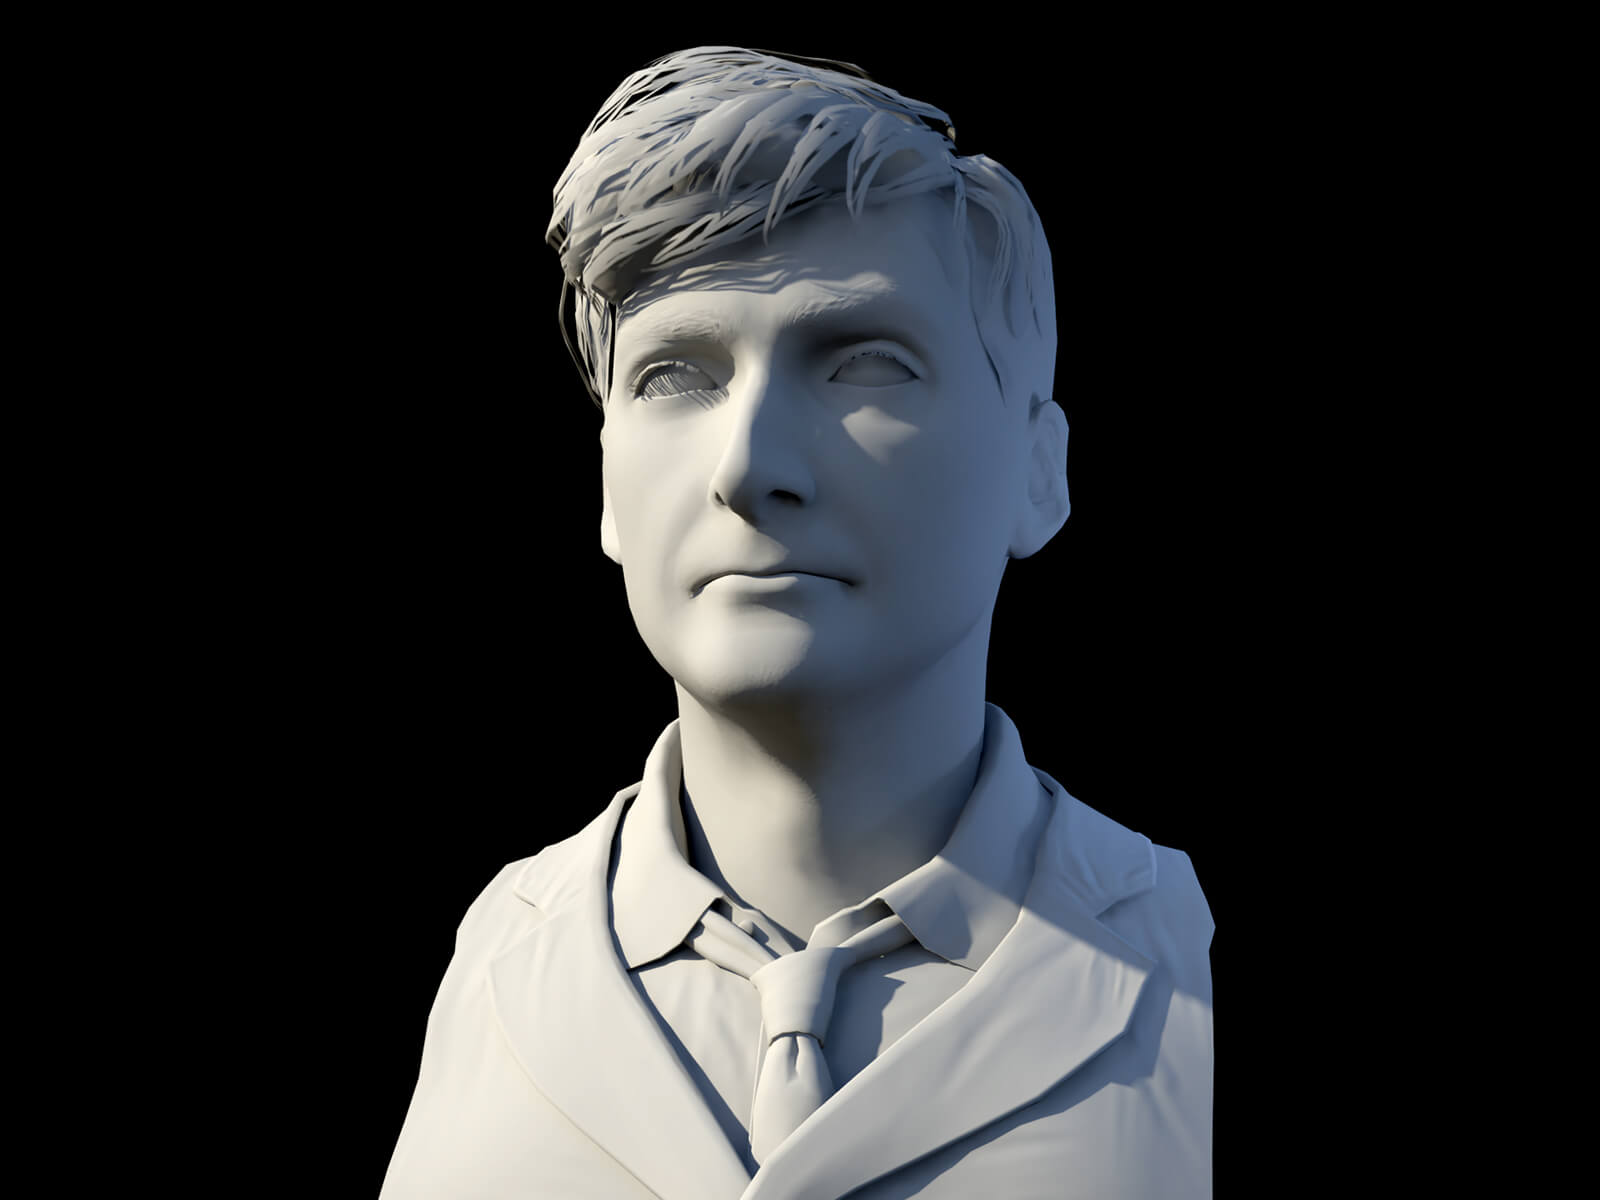 computer-generated 3D model of a young man in a suit jacket and tie